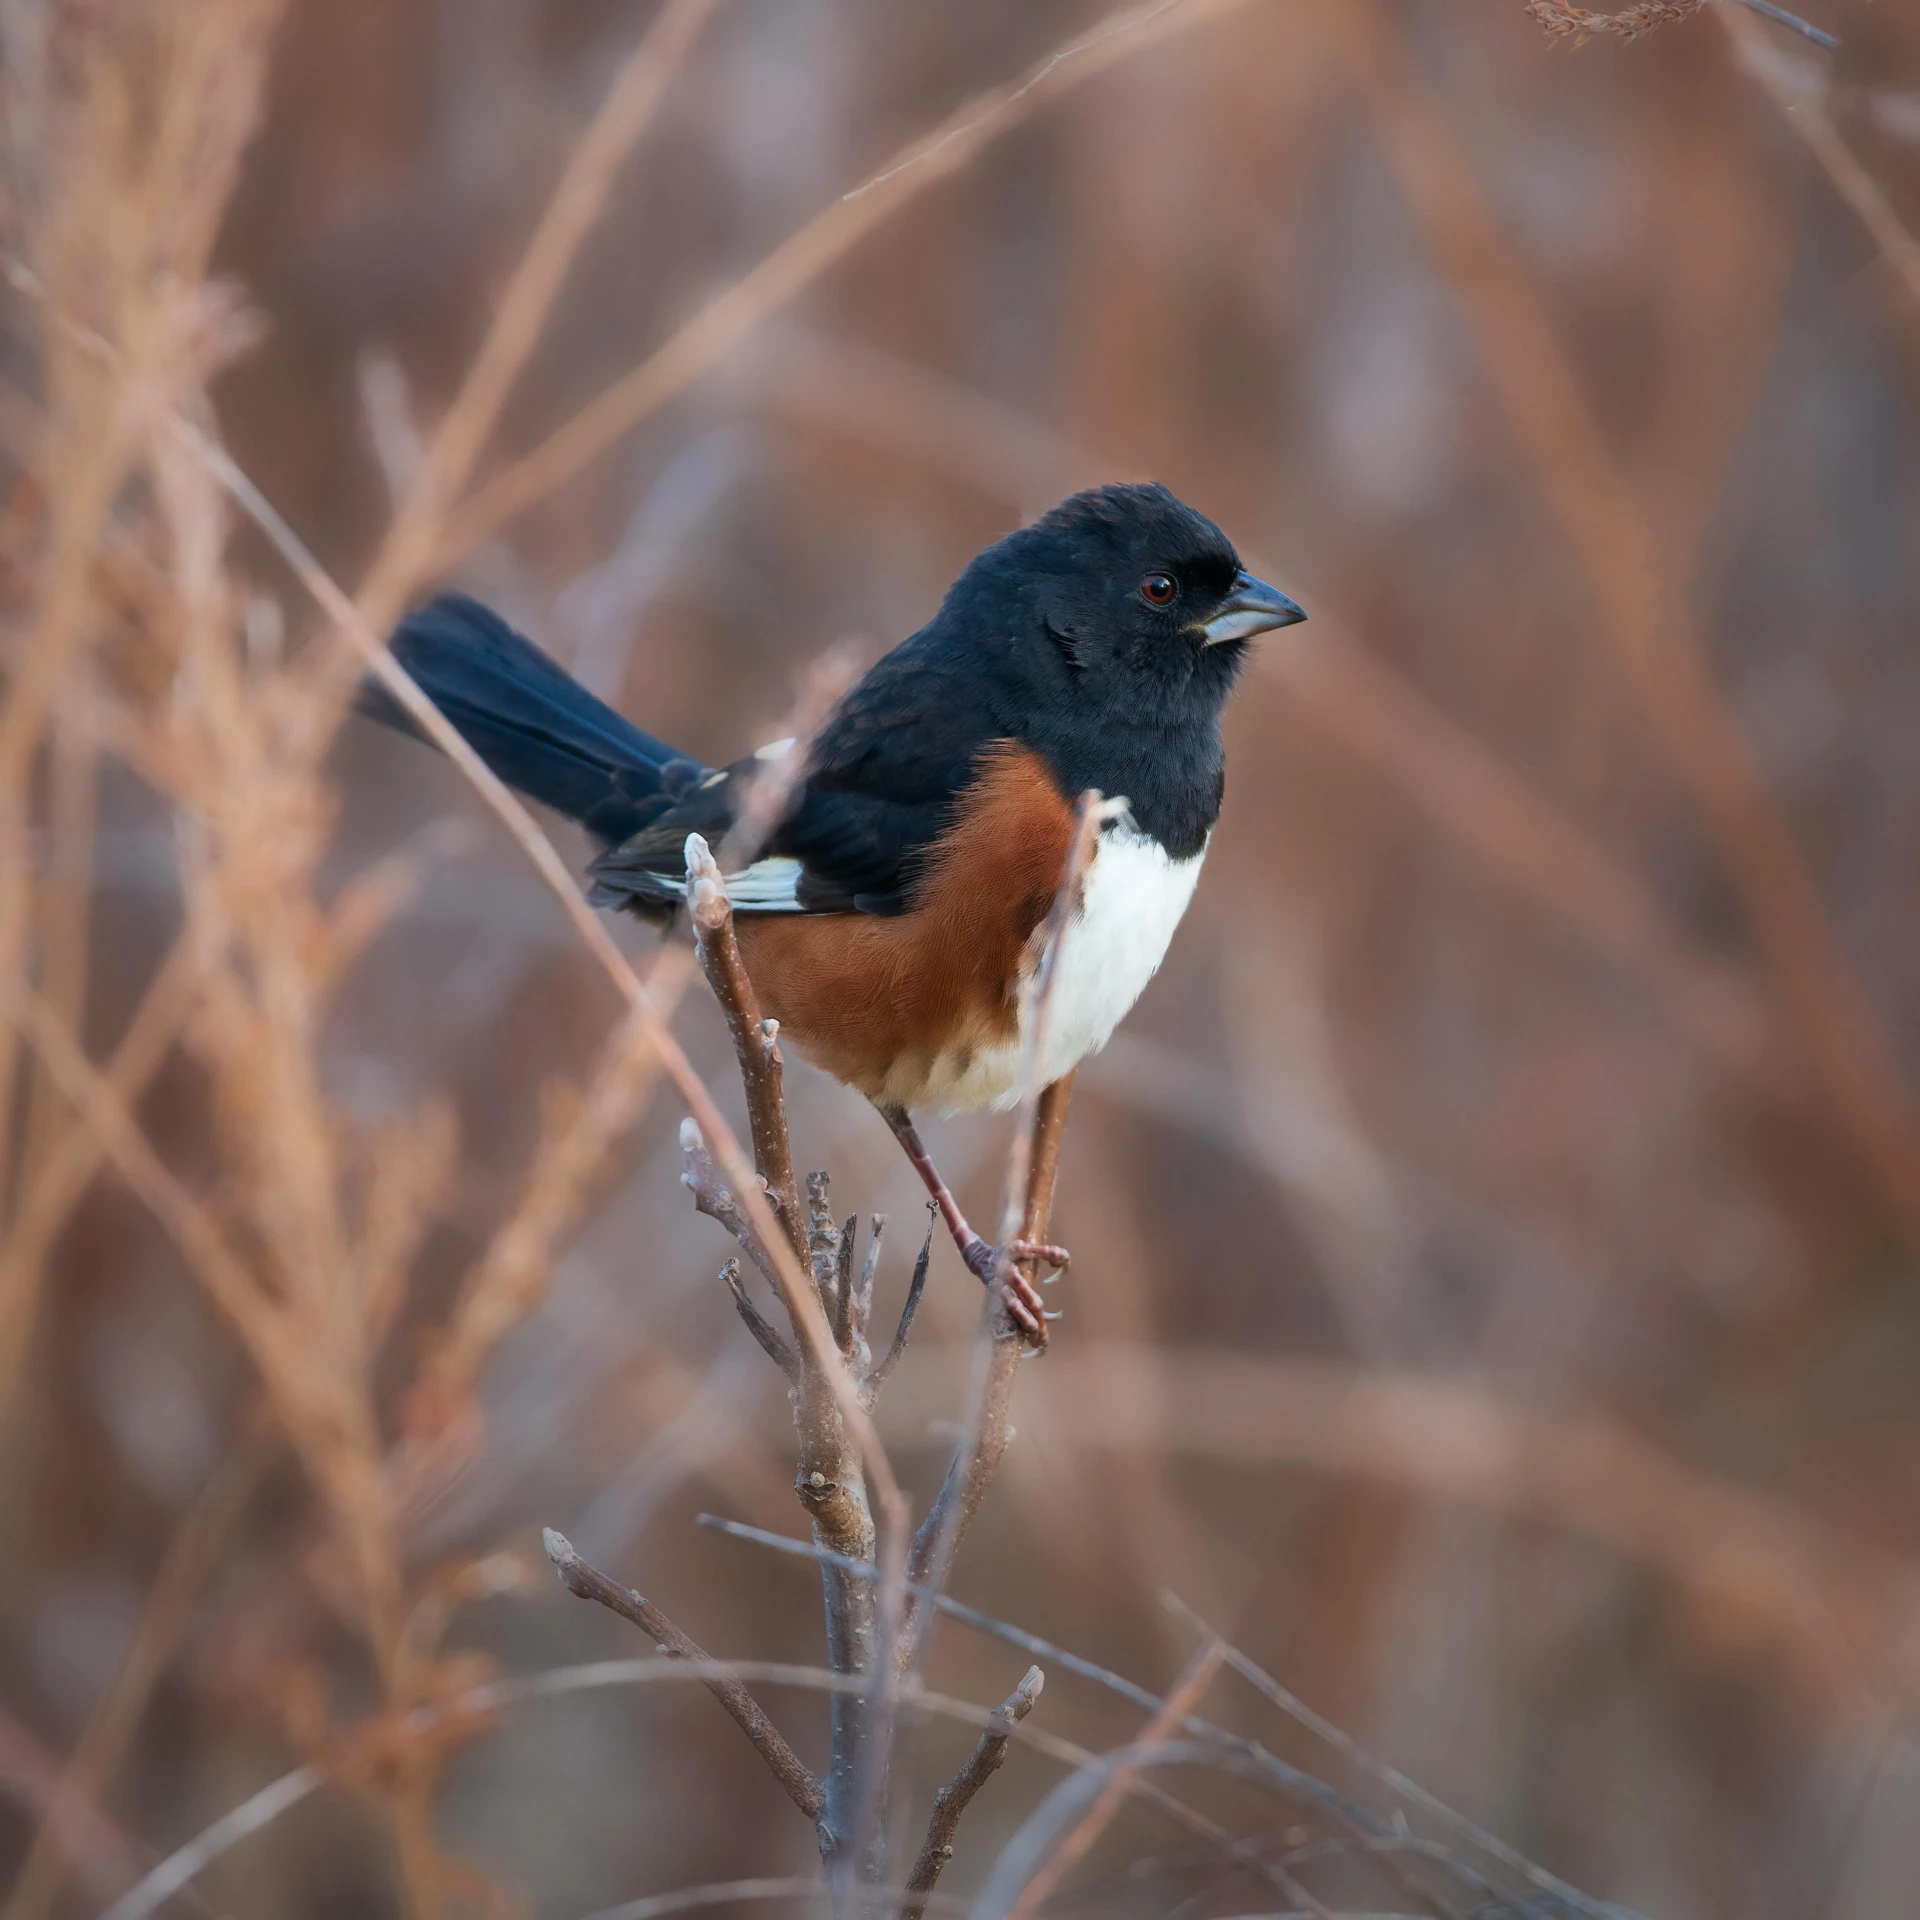 a brown and black bird perched on a plant